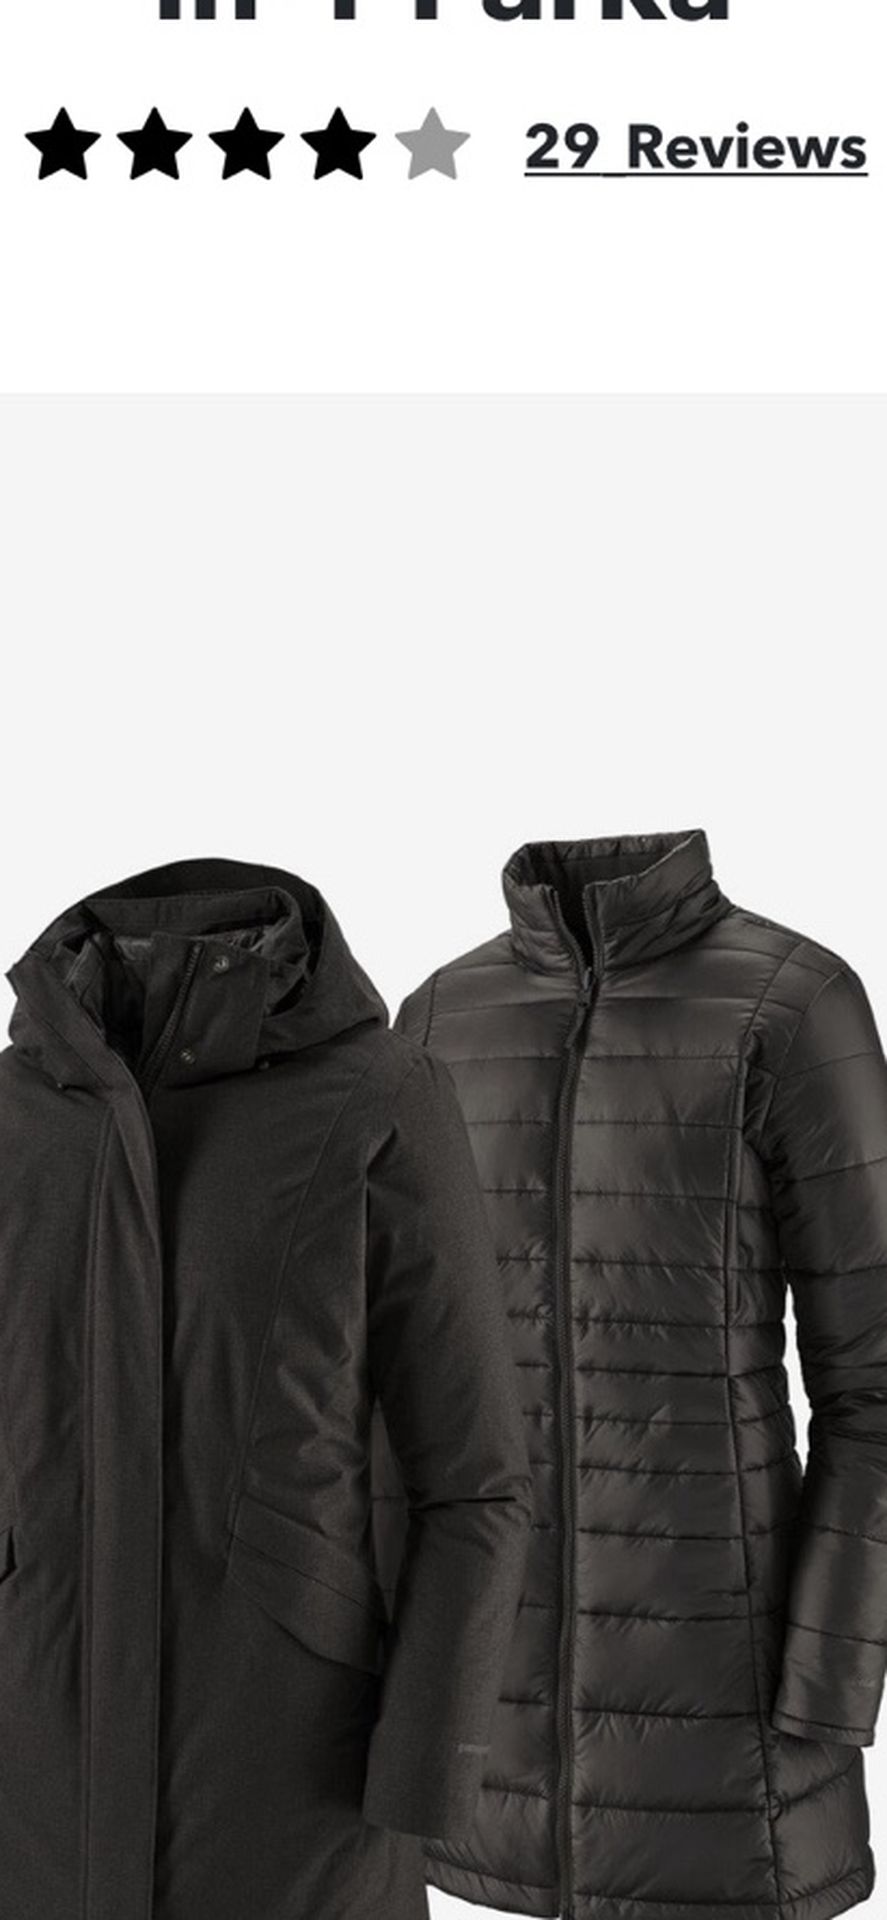 Patagonia Vosque 3 In 1 Parka. $449 New.